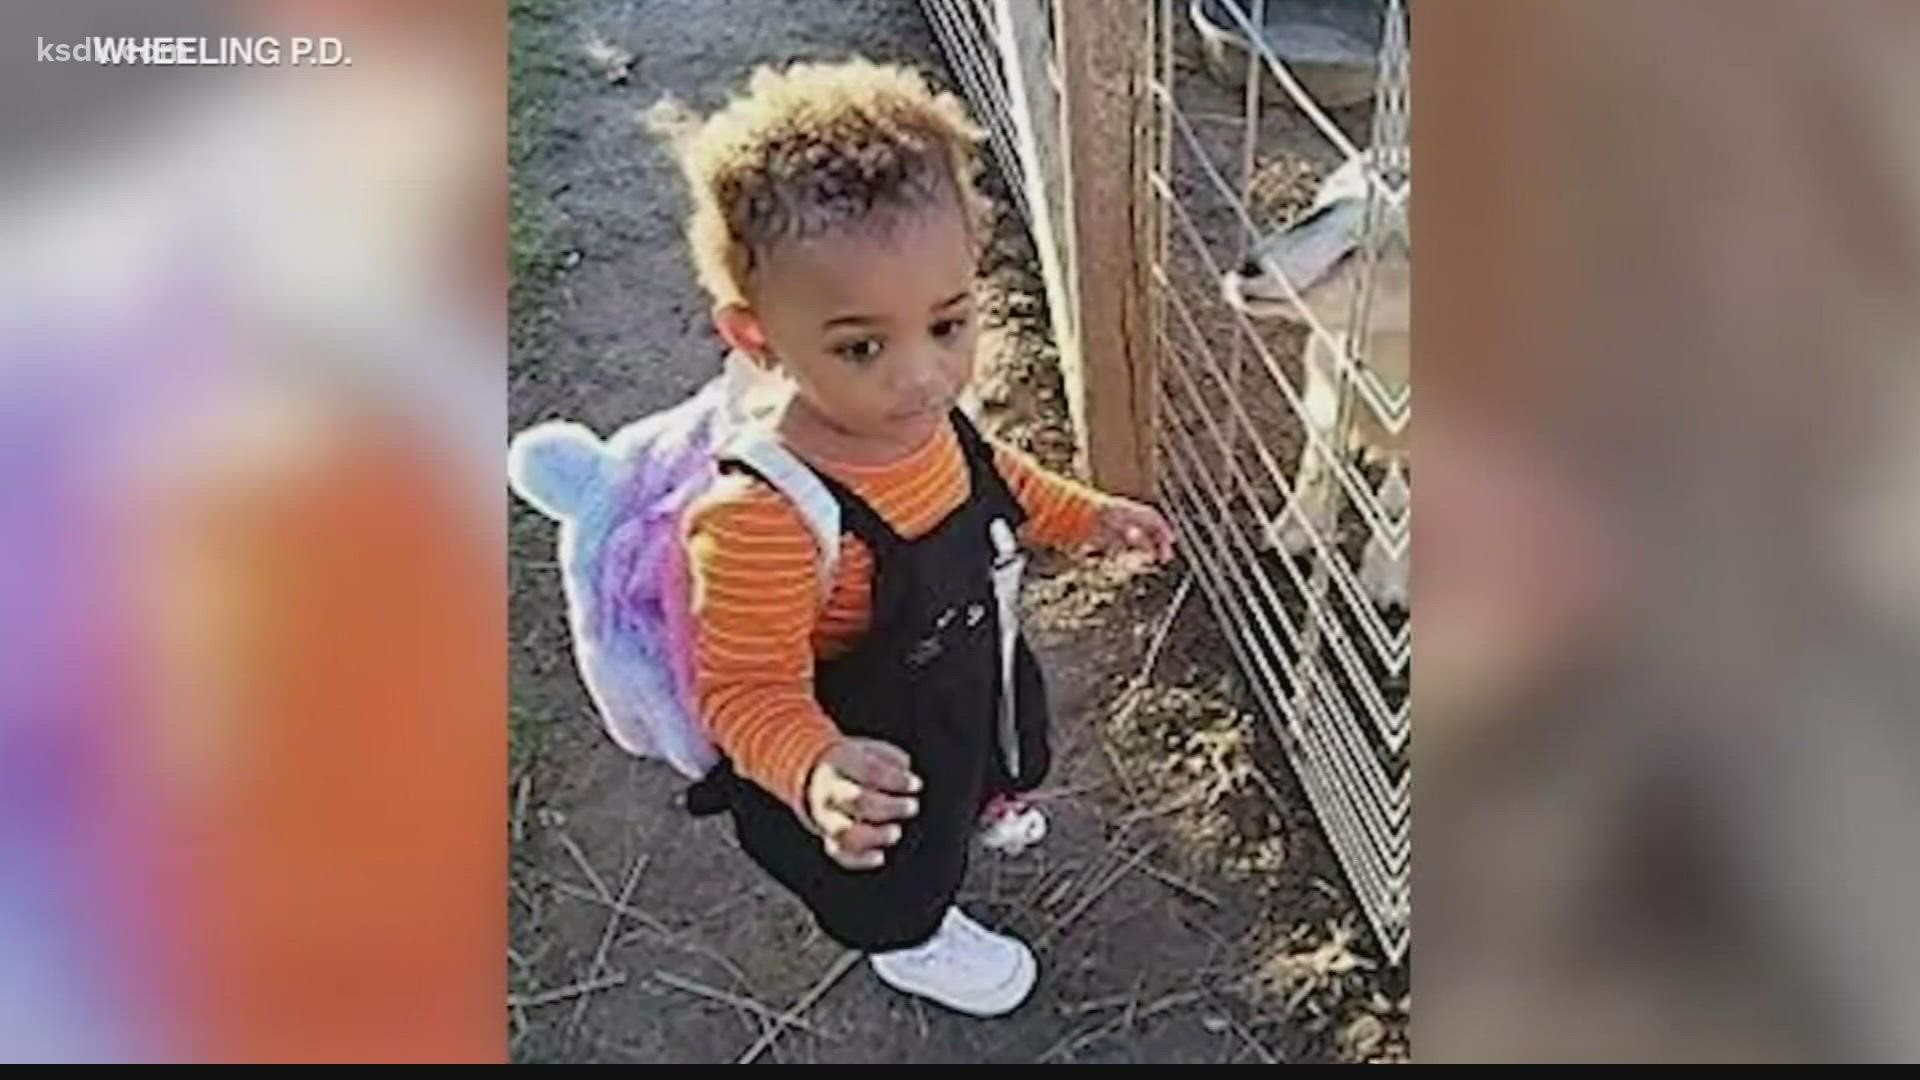 Construction workers found Jaclyn Angel Dobbs' body. The girl was discovered missing after her mother, Ja'nya Murphy, was found dead in her Wheeling apartment.